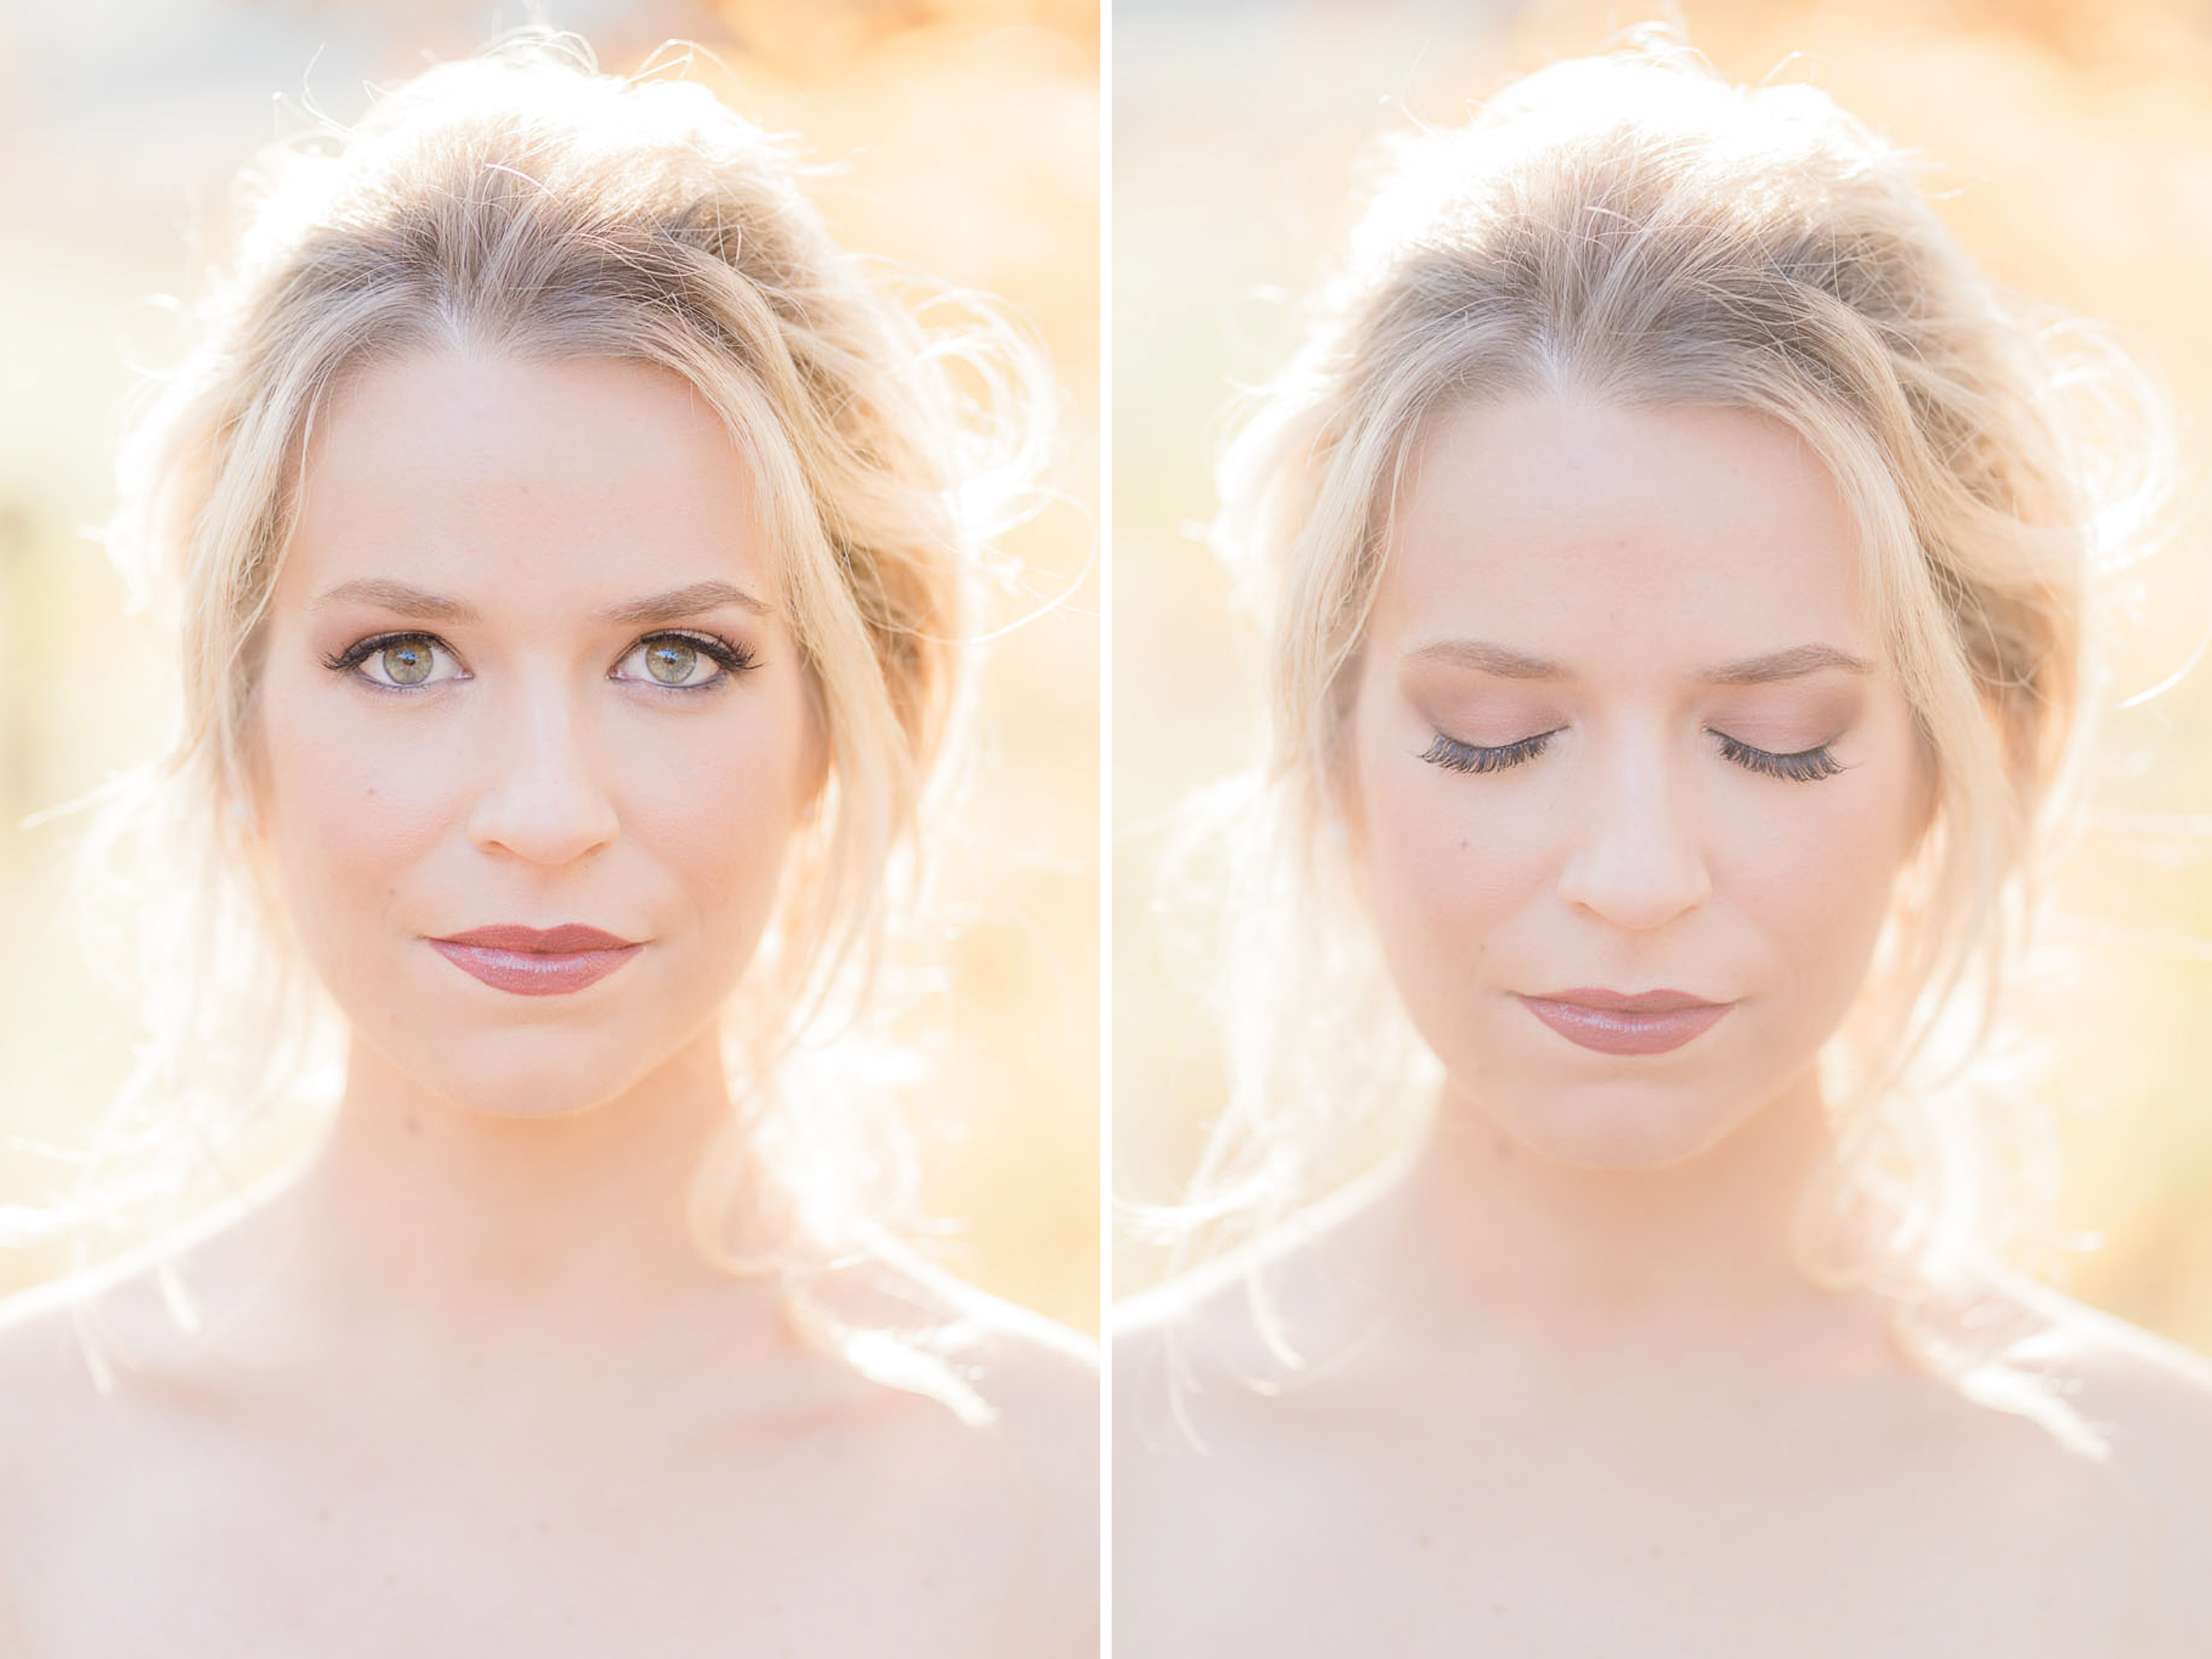 Lovely soft classic bridal makeup done by professional.